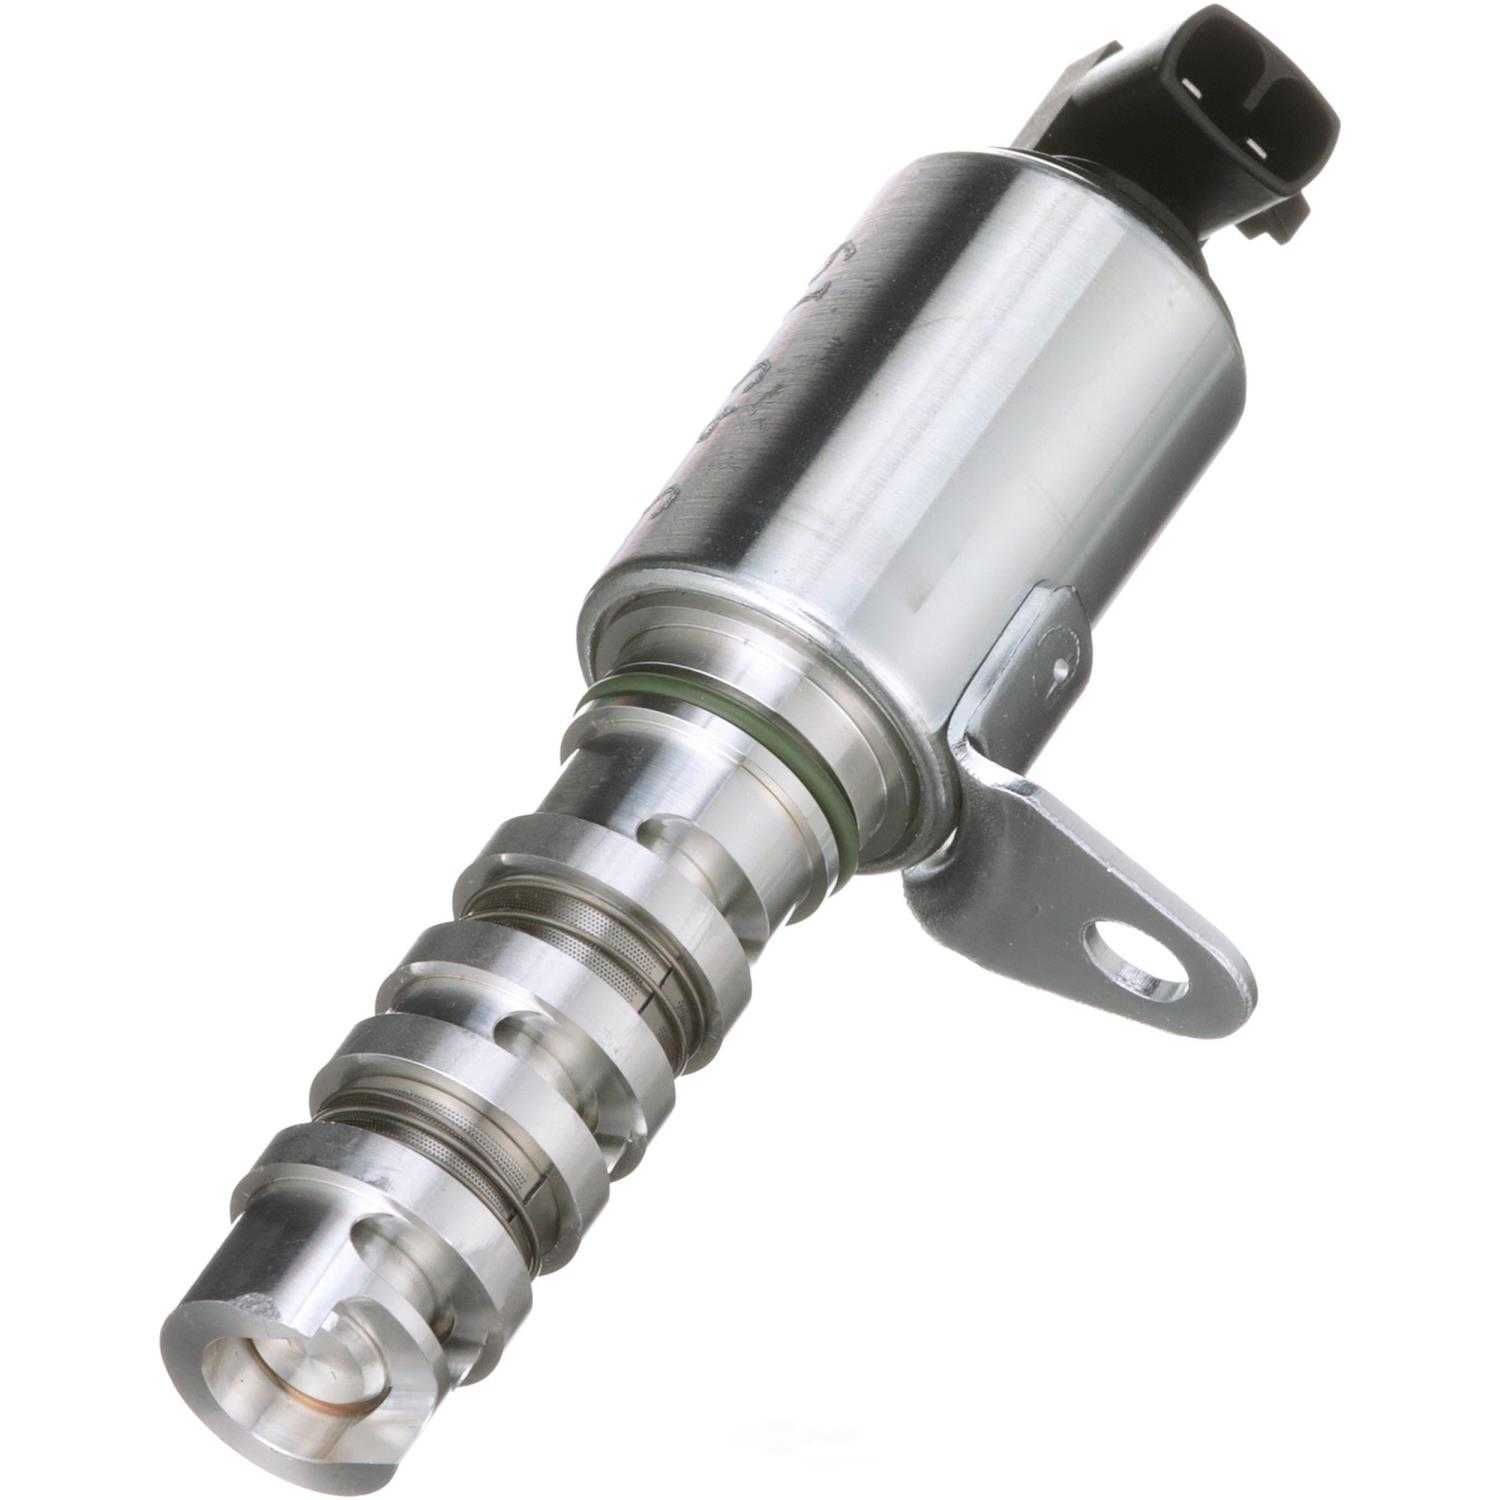 STANDARD MOTOR PRODUCTS - Engine Variable Valve Lift Eccentric Shaft Actuator - STA VVT105